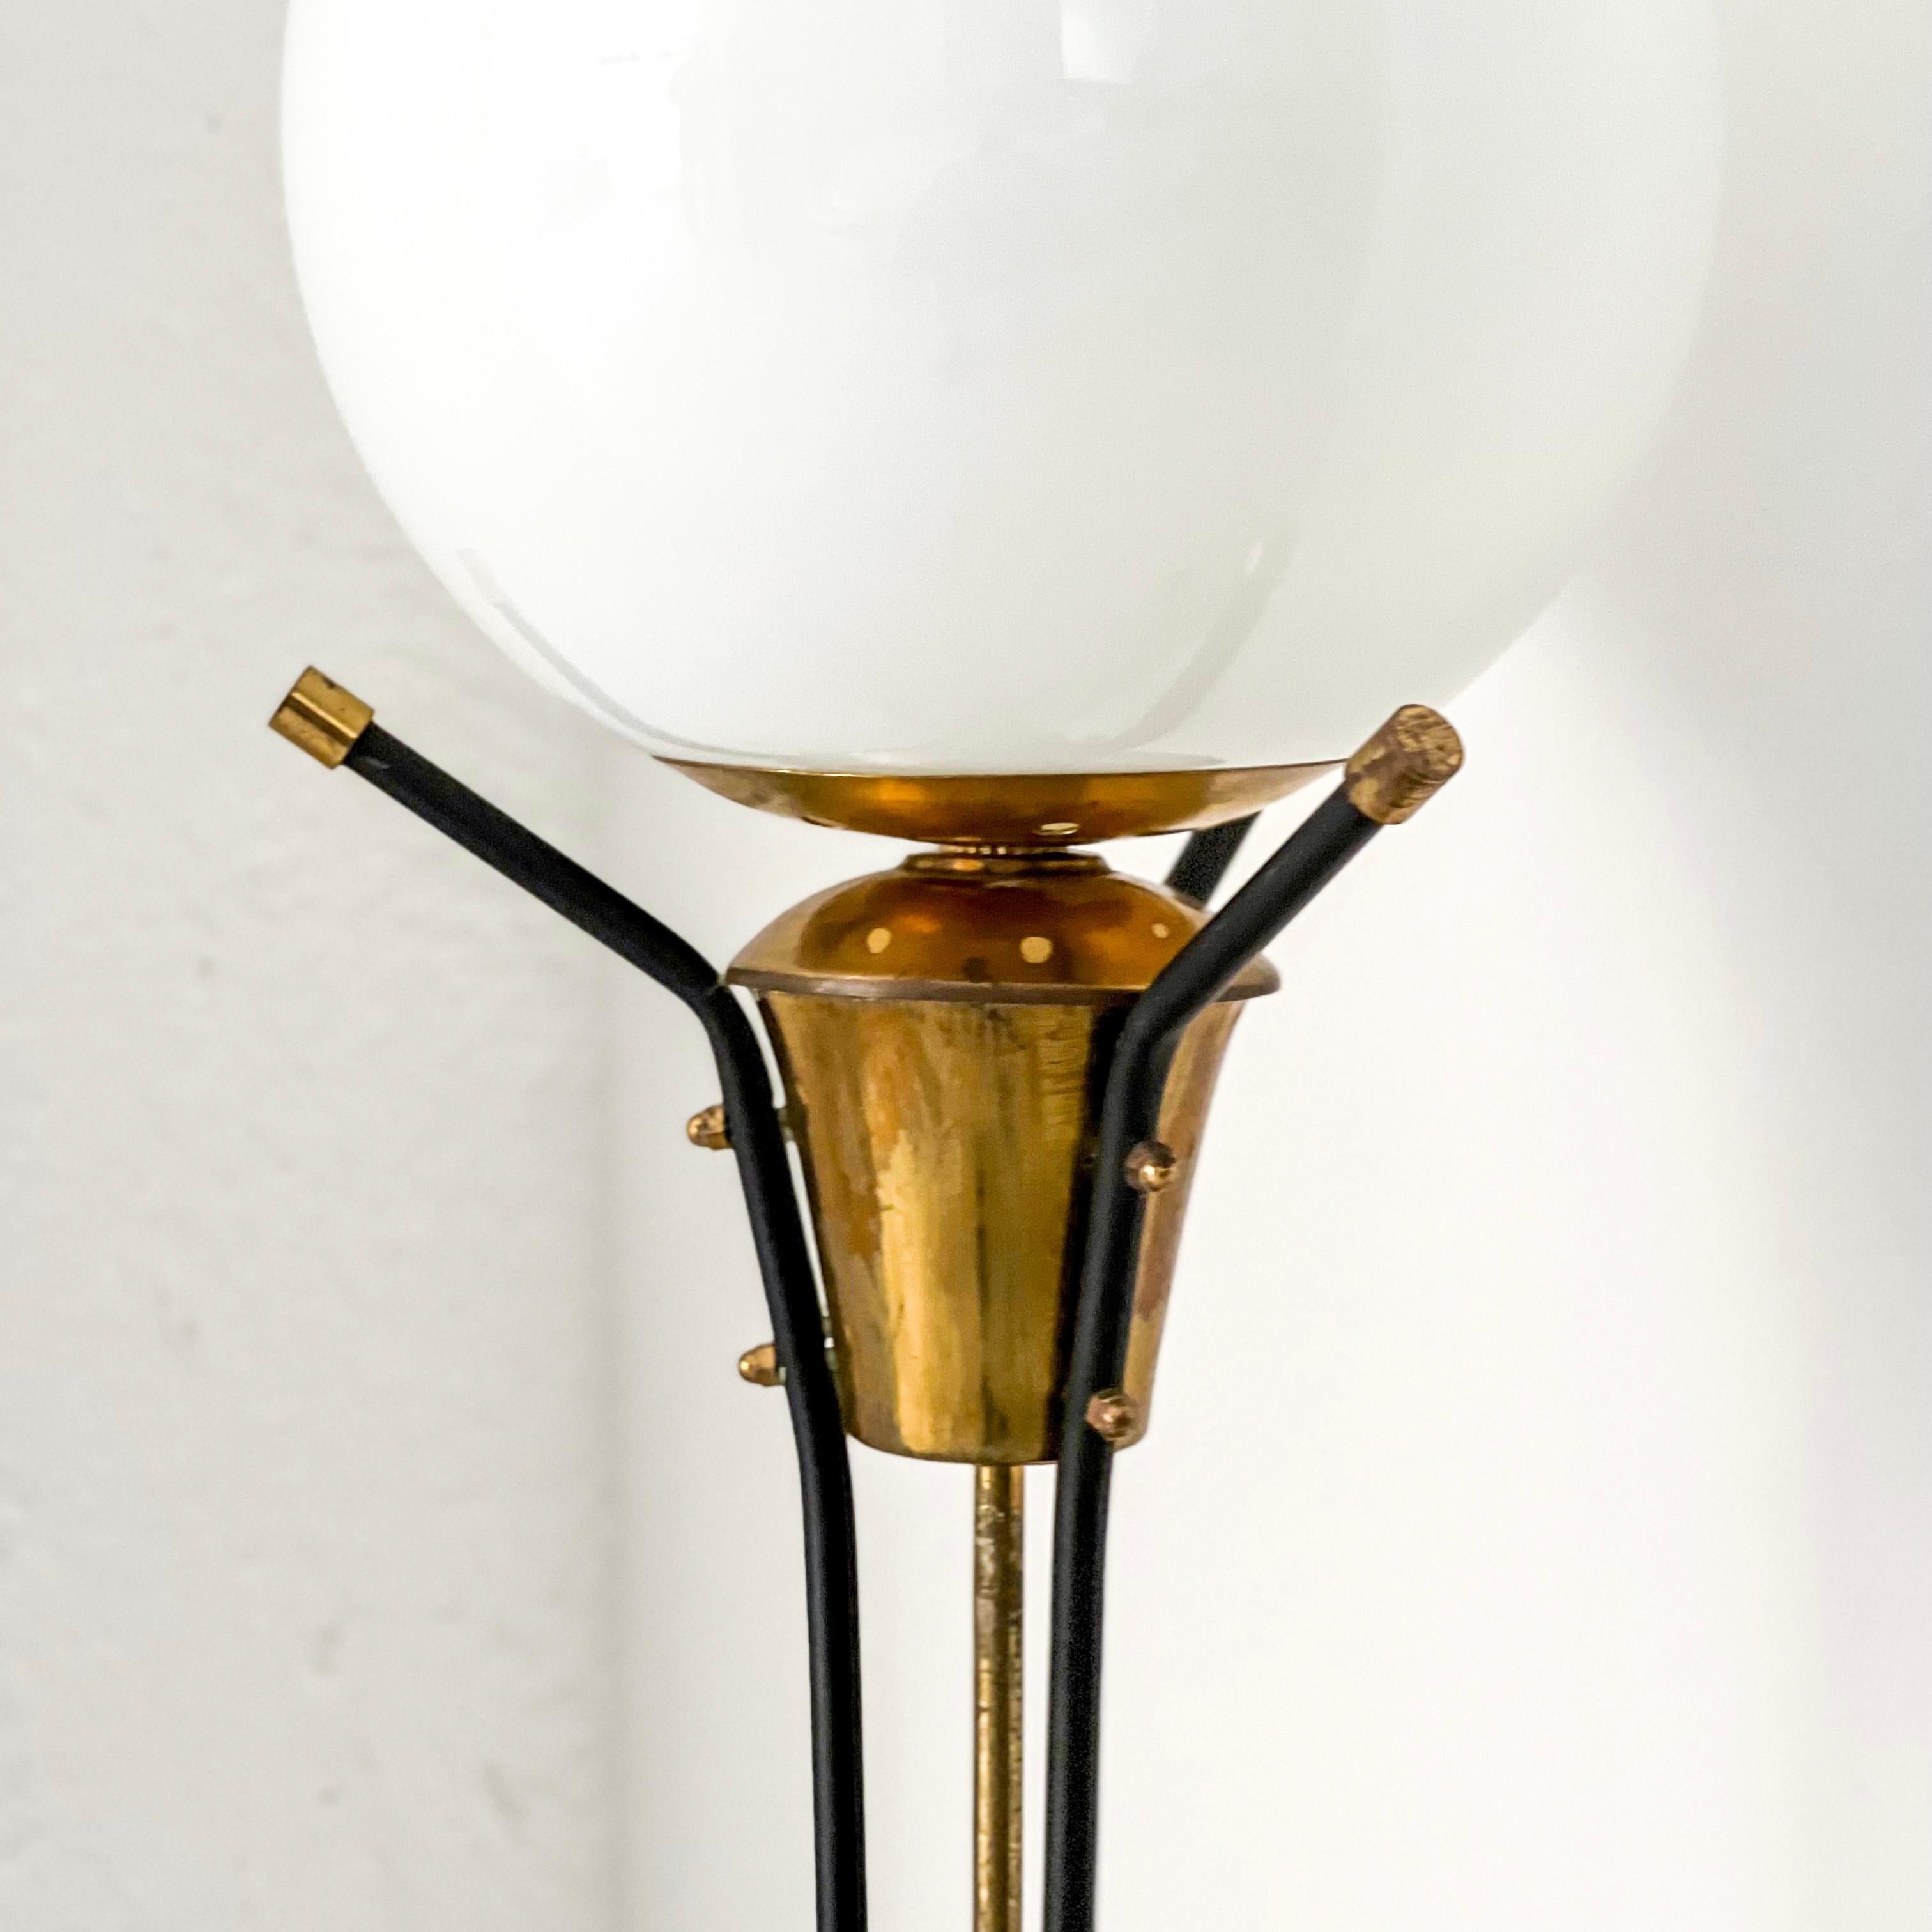 Offered for sale here is a beautiful, rare and well preserved floor lamp, produced in Italy and dating back to the 1950s. It is a floor lamp of medium height, with a thin base consisting of three elegant brass legs. On top of the legs, three brass